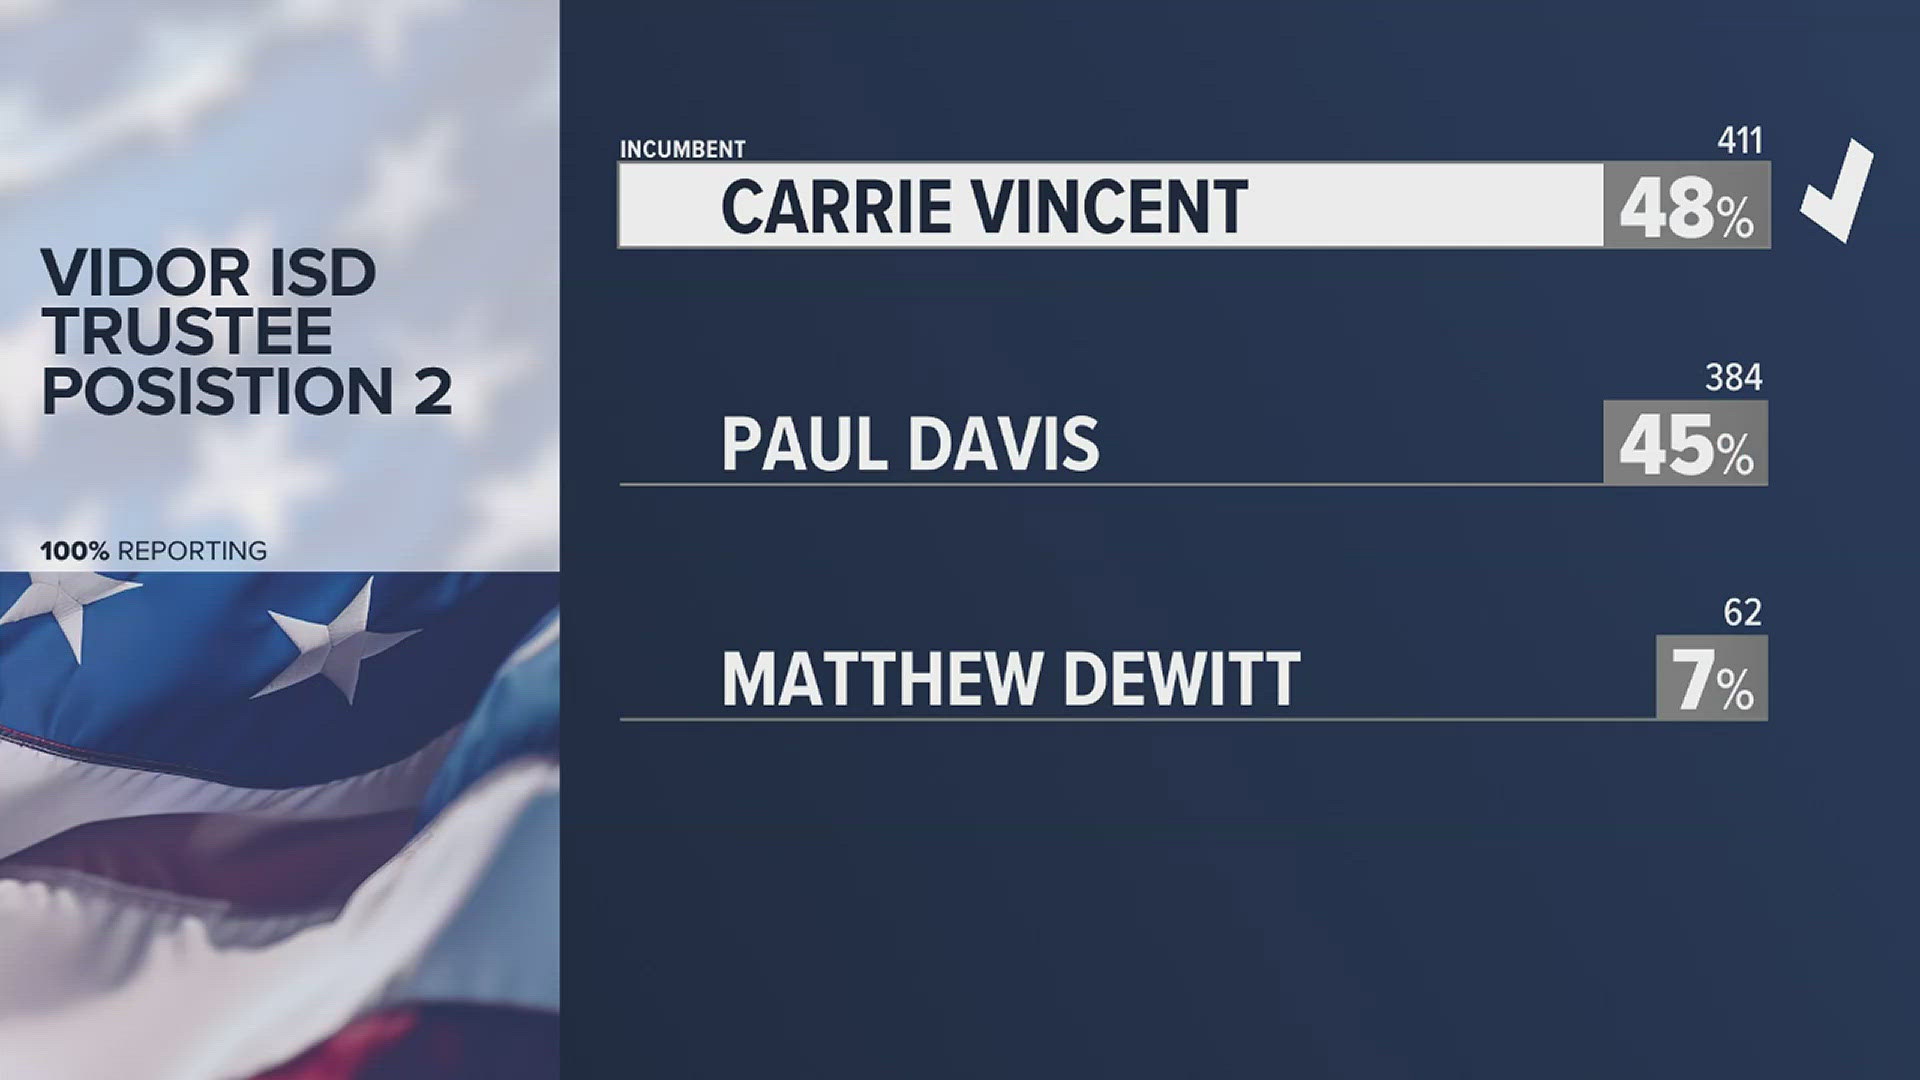 Incumbent, Carrie Vincent took home 48% of votes